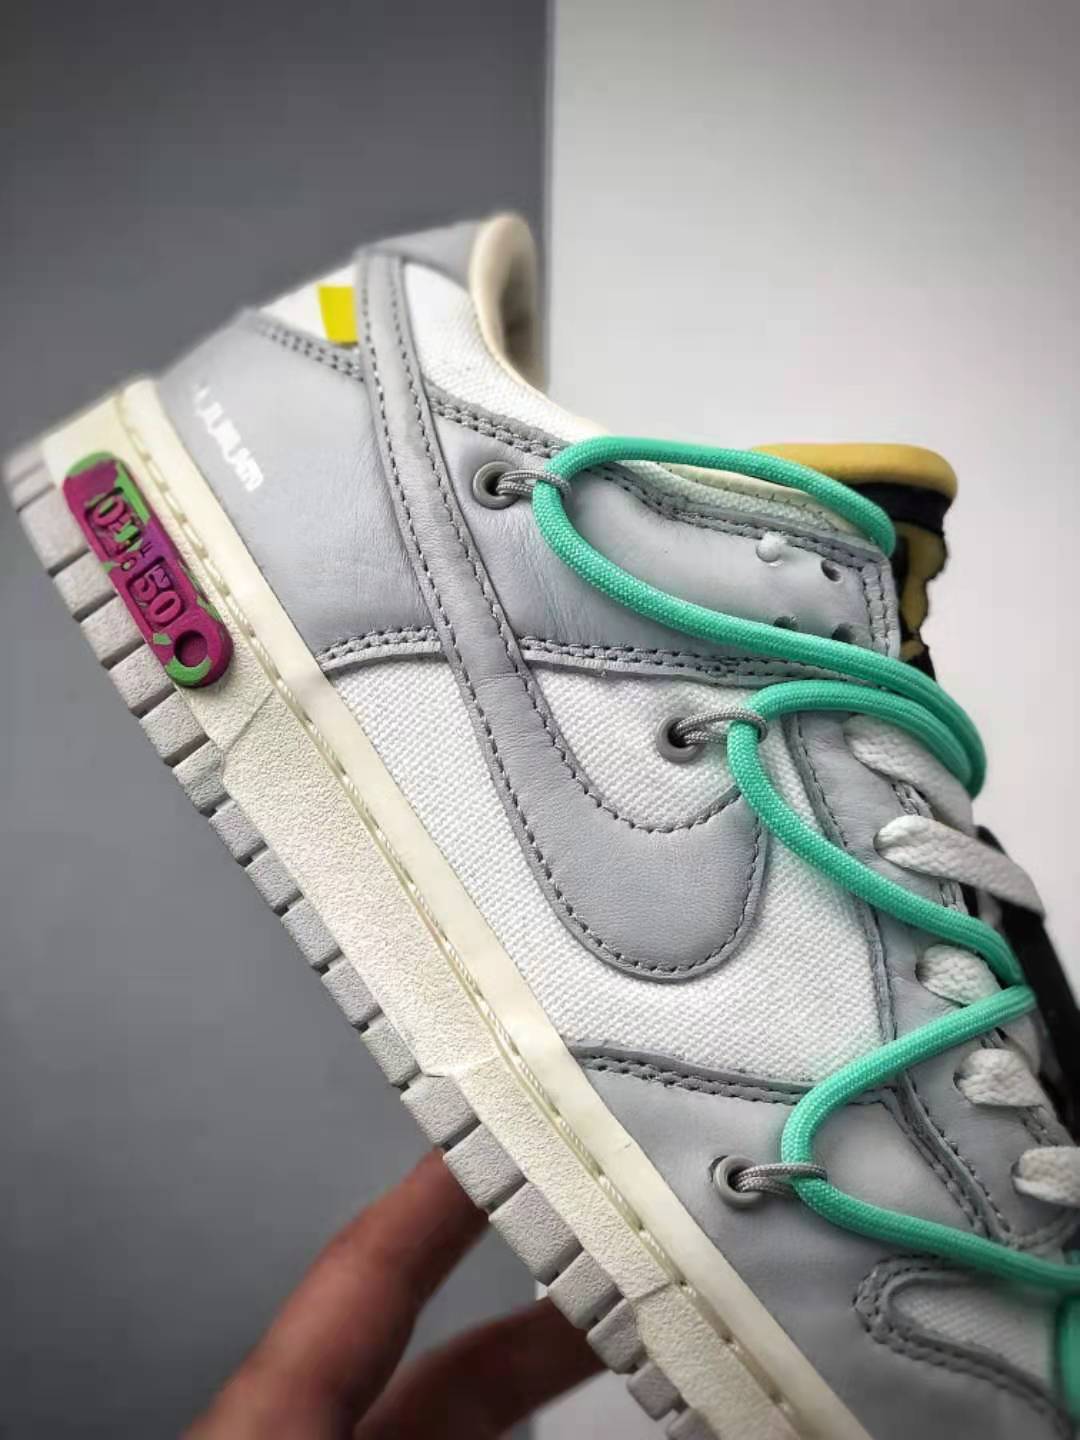 Off-White x Nike SB Dunk Low 04 of 50 OW White Grey Green DM1602-114: Limited Edition Collaboration